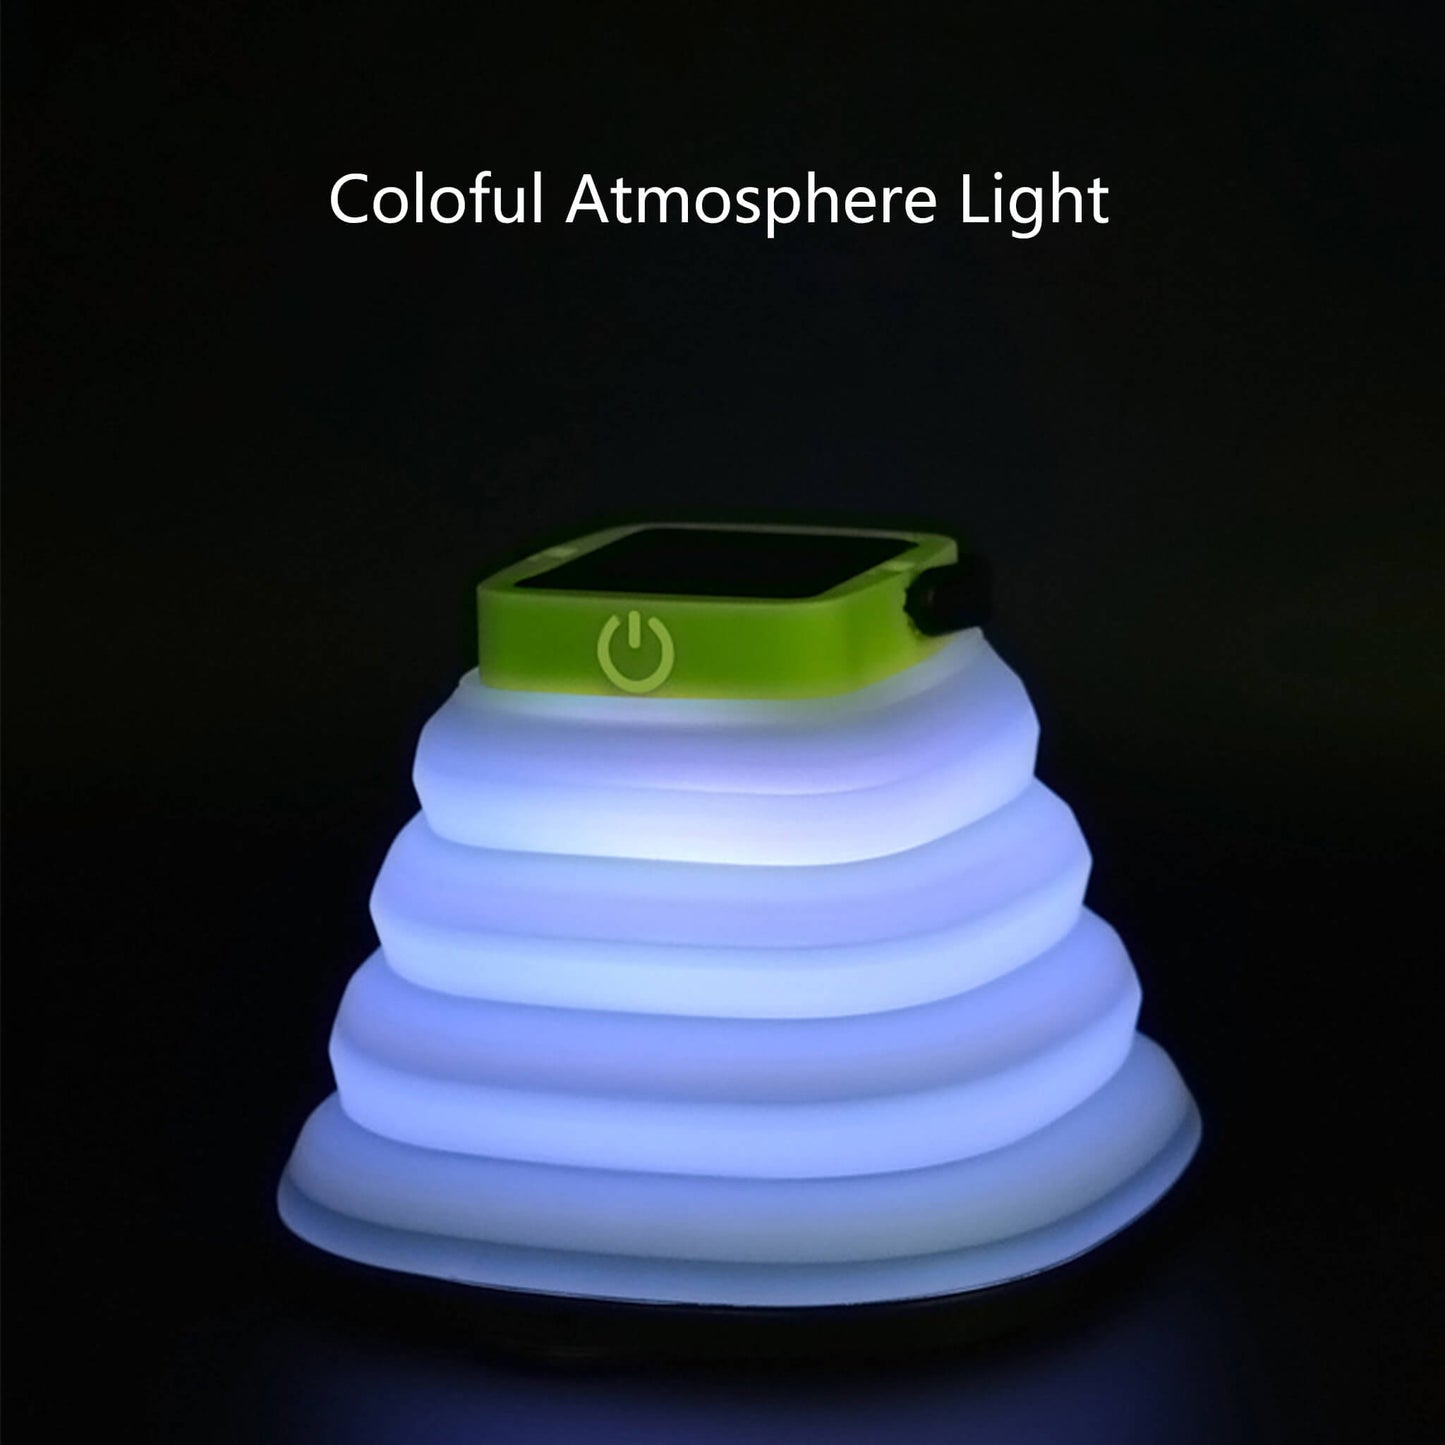 Solar-Powered Collapsible Travel LED Light